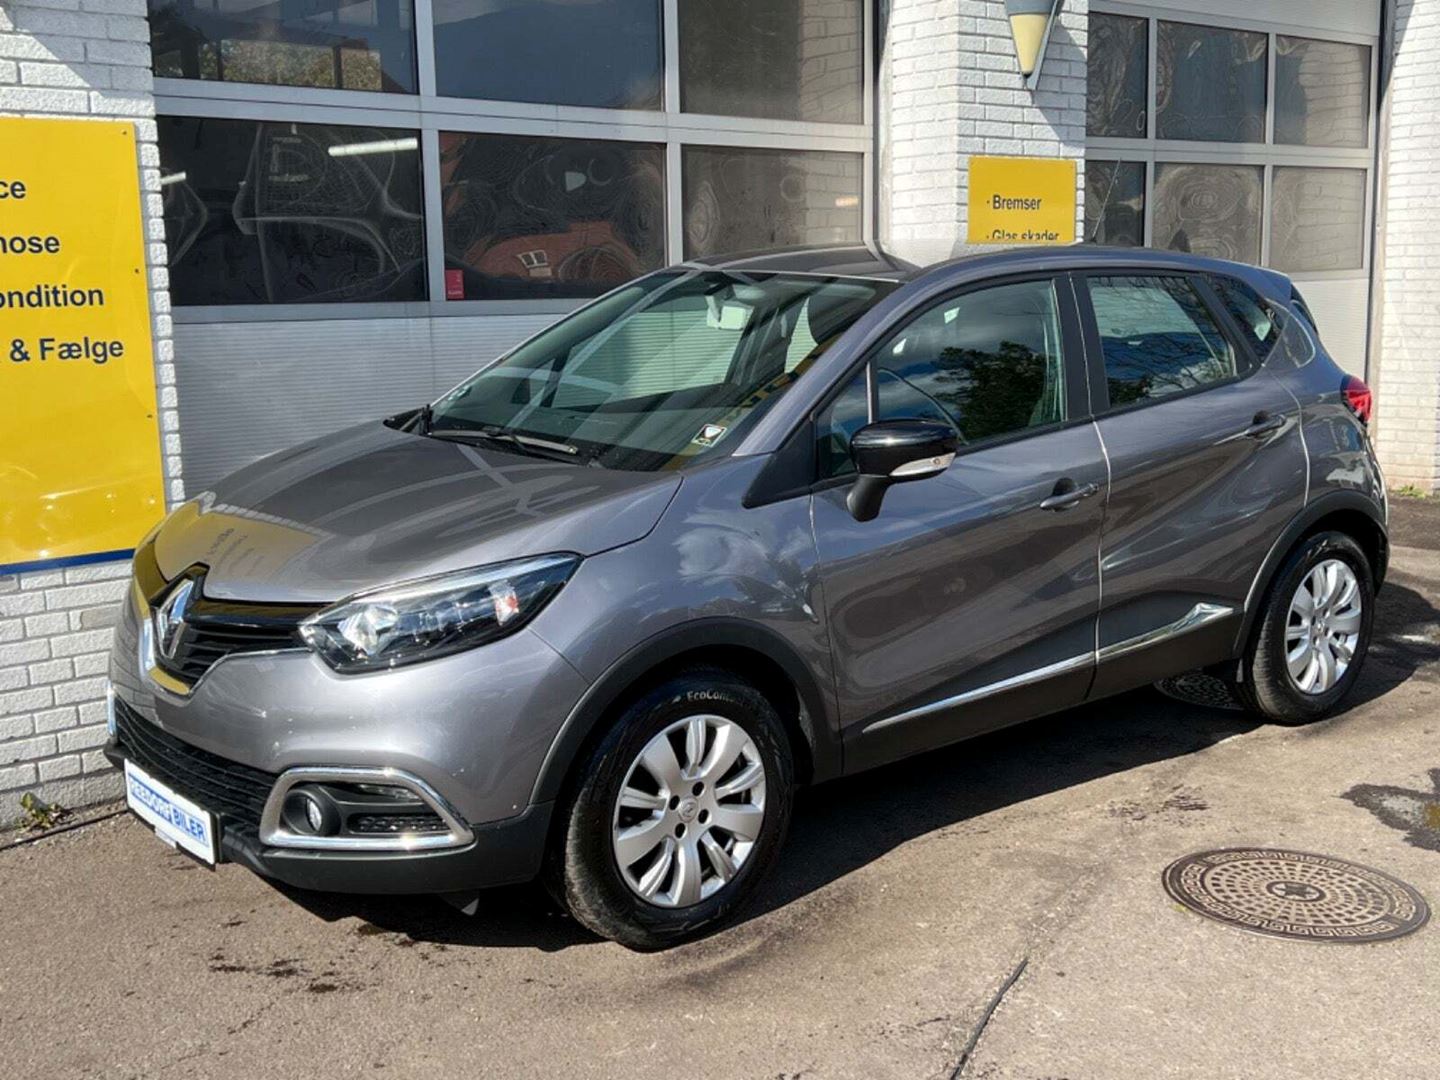 I fare trappe edderkop Renault Captur 0,9 TCe 90 Expression - 84.900 kr